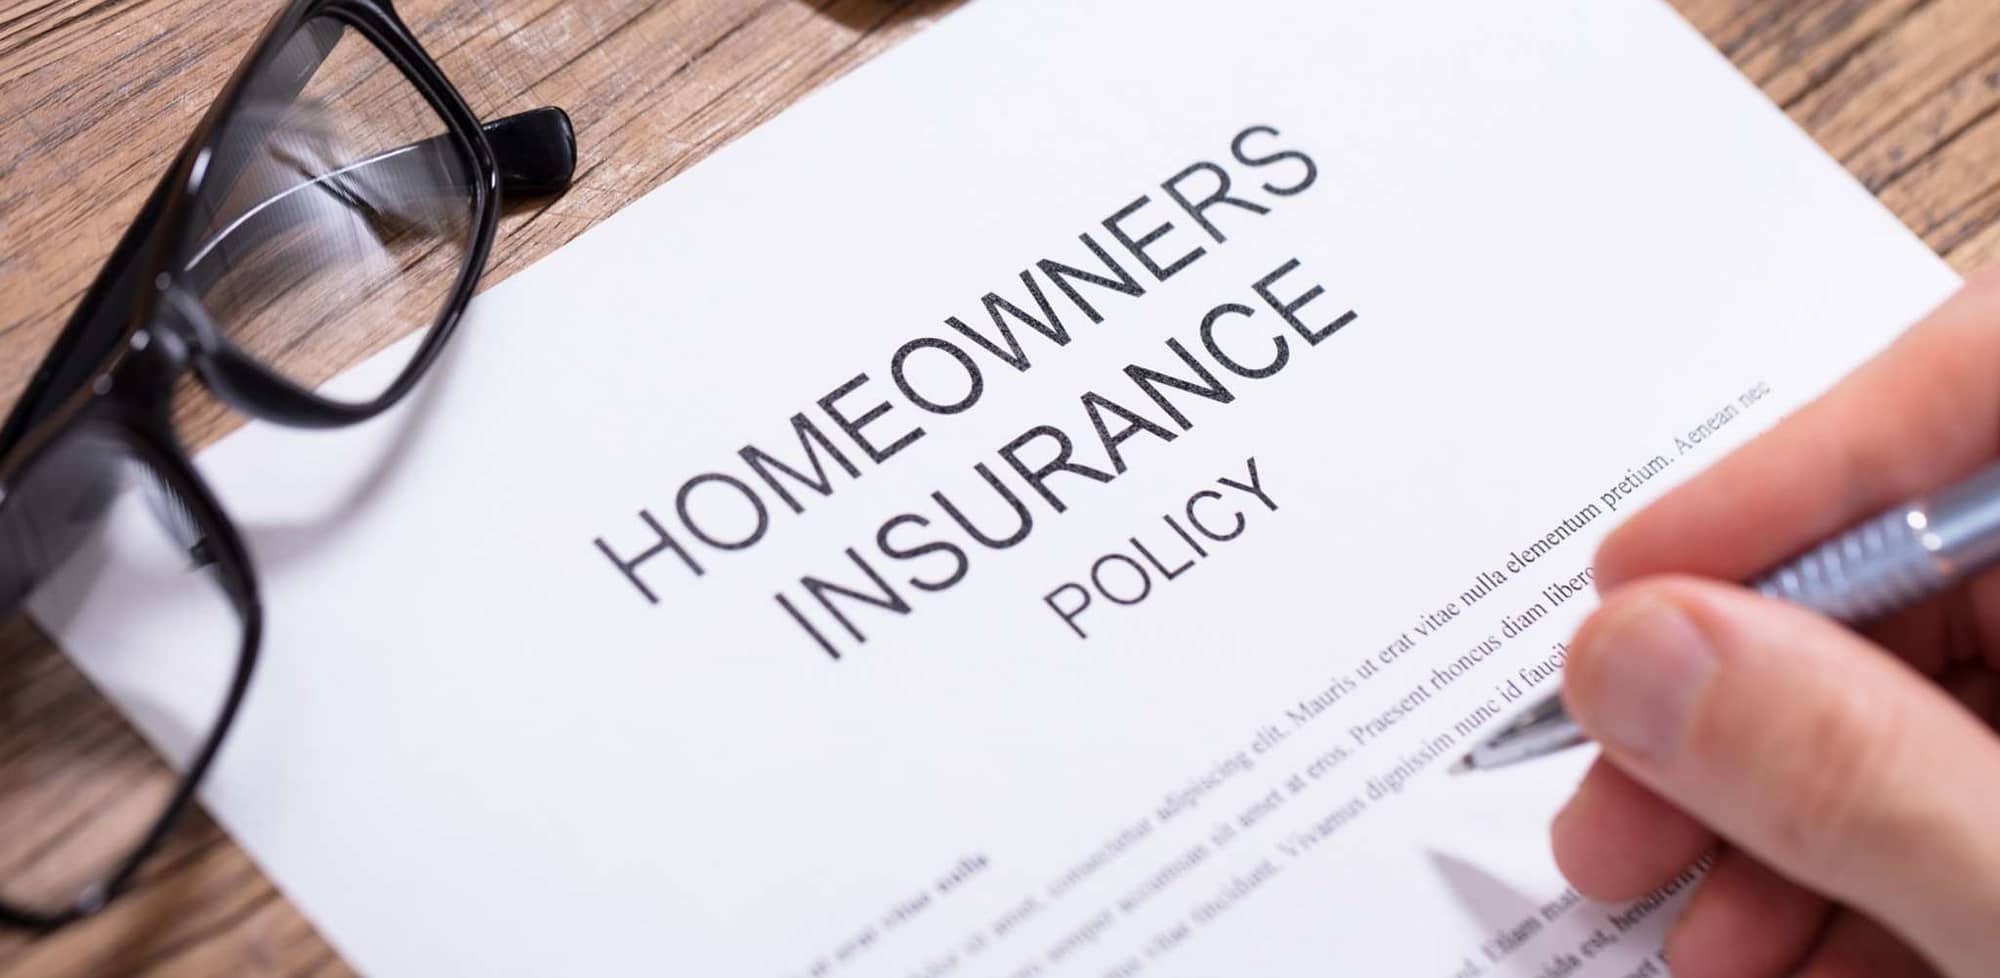 Learn about common product codes for homeowners insurance and how they are marketed. | WaterStreet Company